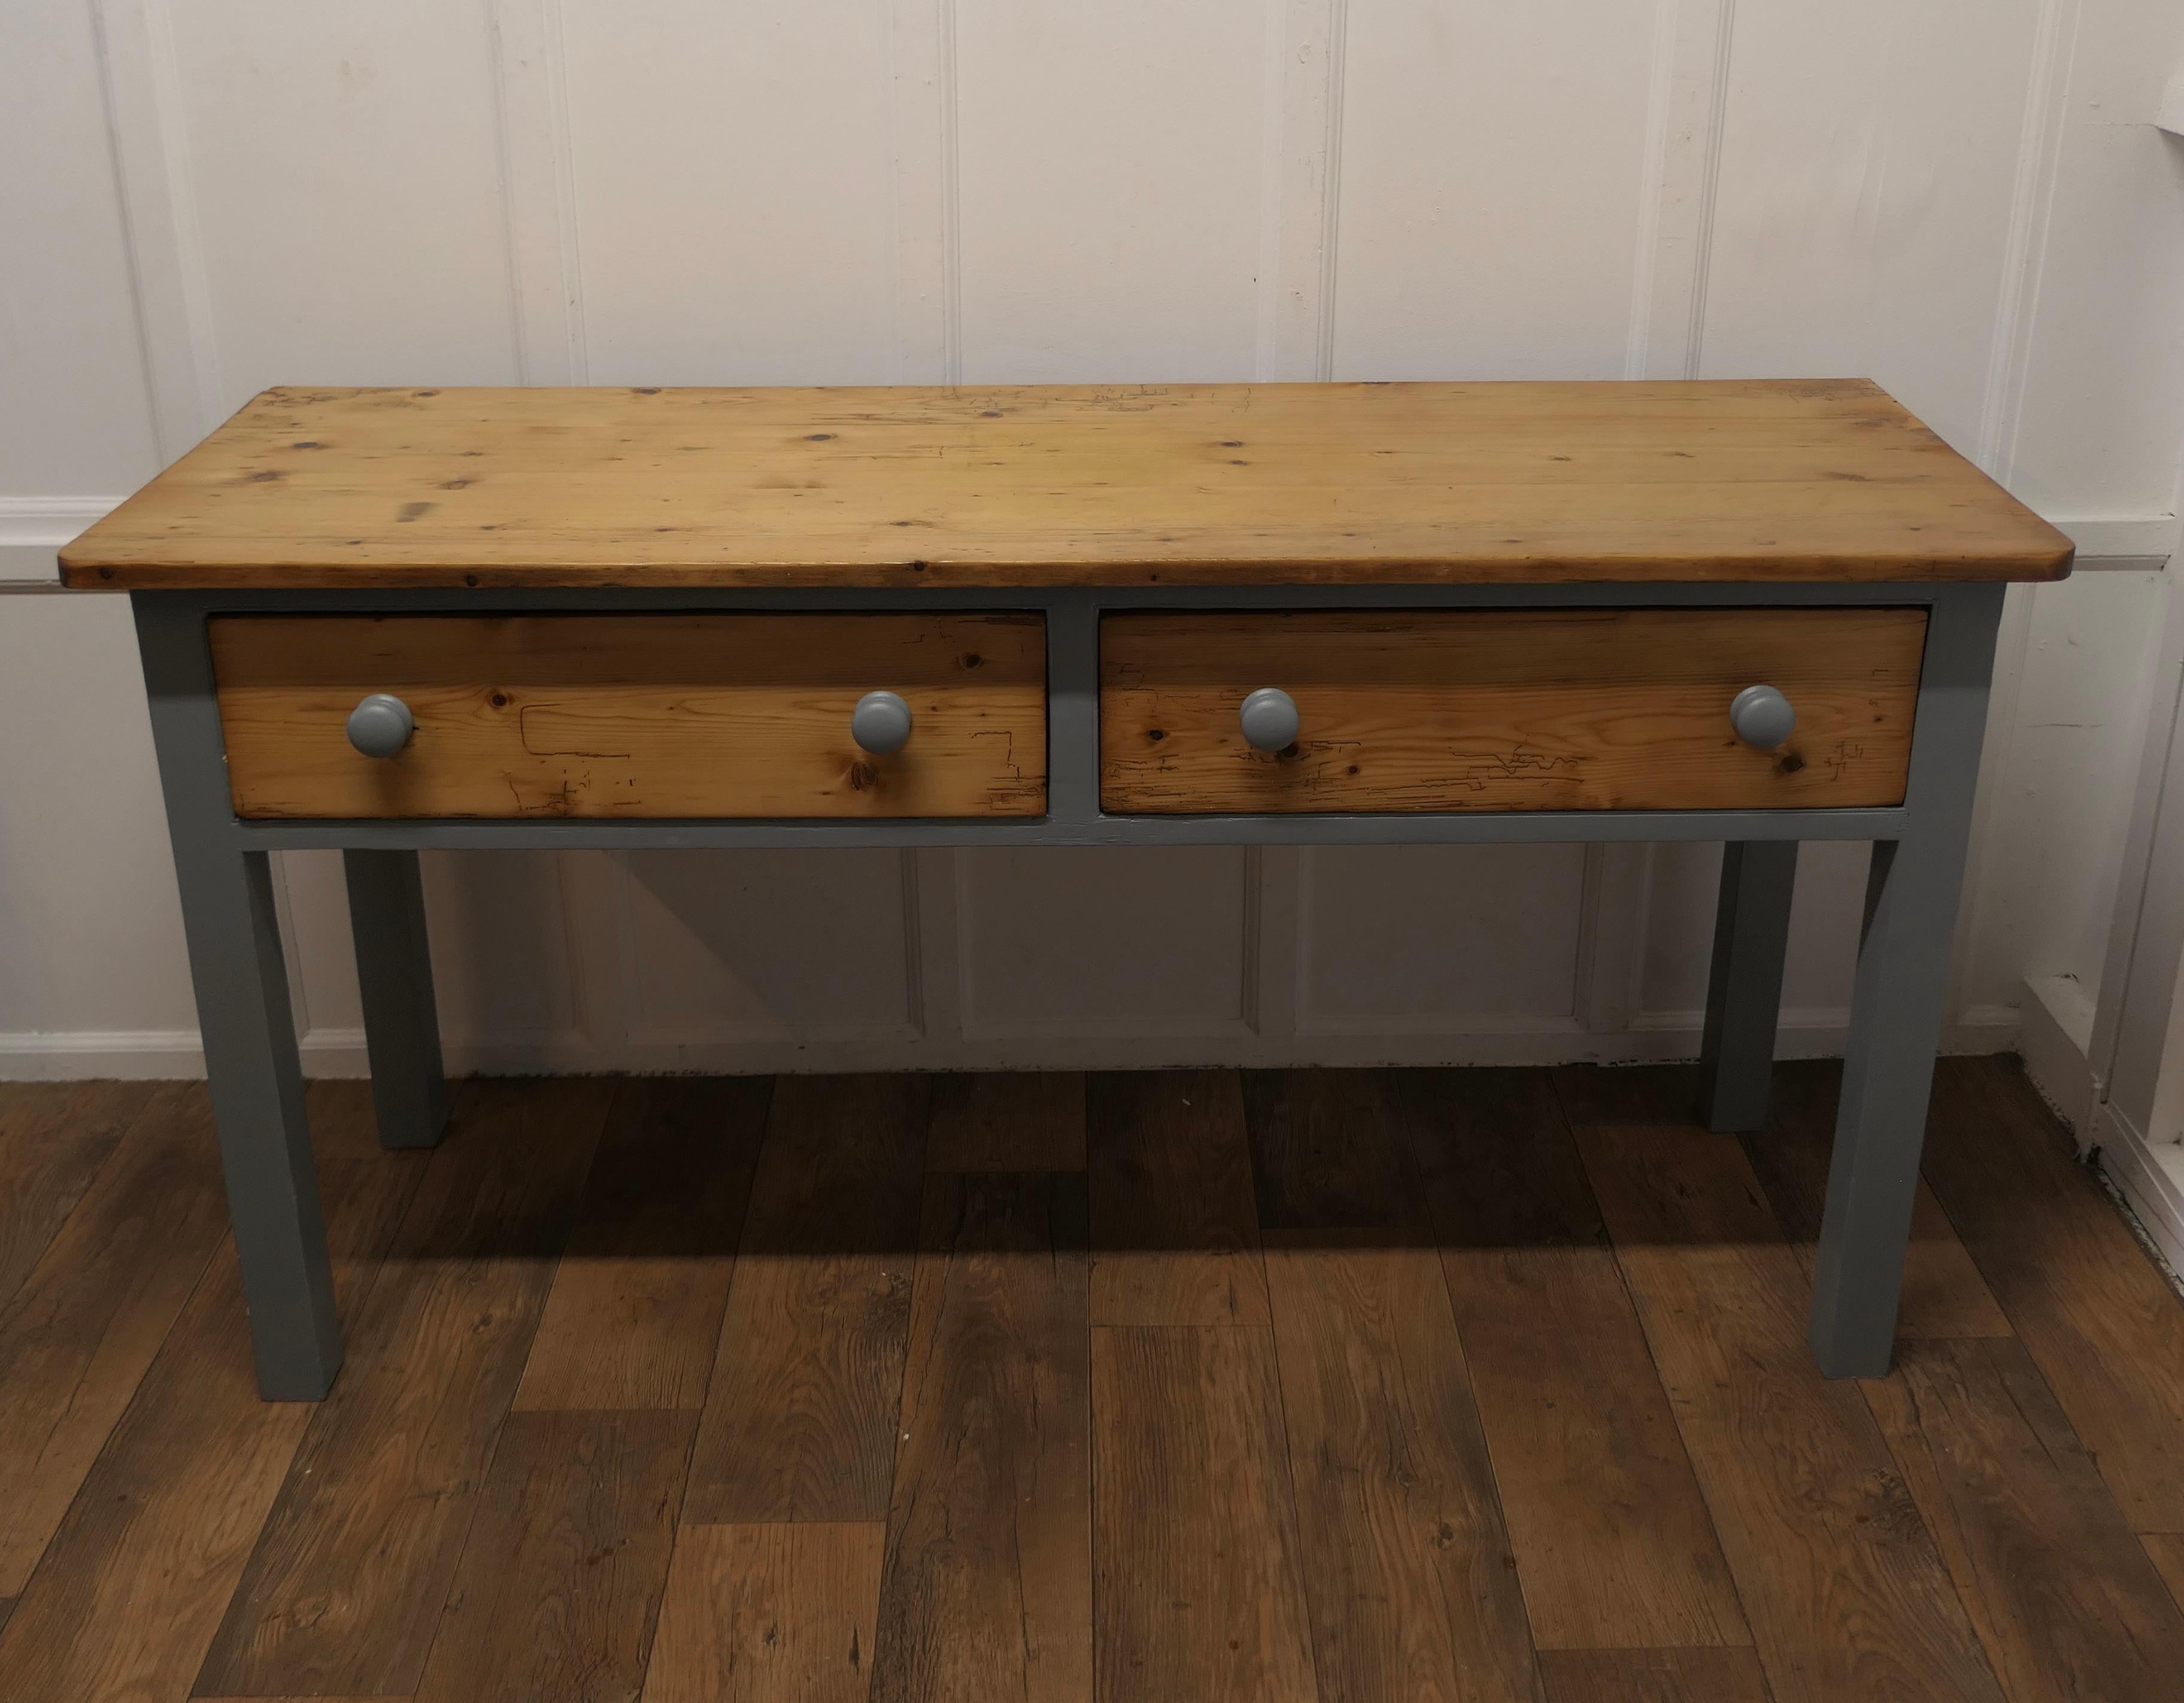 A Victorian Pine Kitchen Dresser   The dresser base has a thick solid pine top  In Good Condition For Sale In Chillerton, Isle of Wight